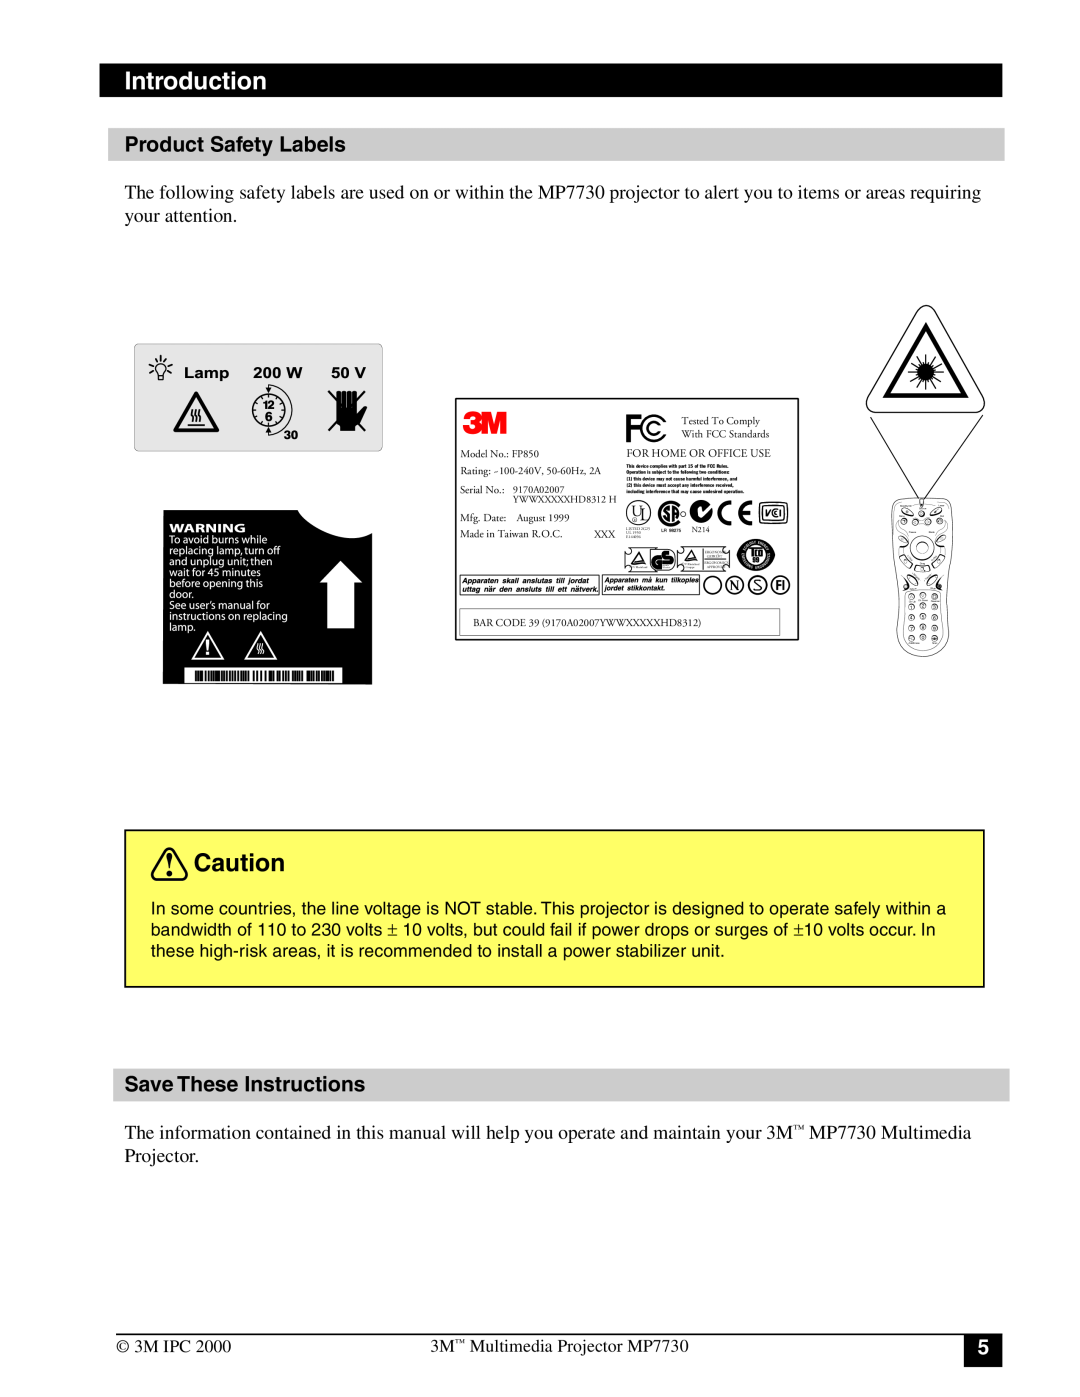 3M MP7730 manual Product Safety Labels, Save These Instructions, Introduction, YWWXXXXXHD8312 H, Mfg. Date August 